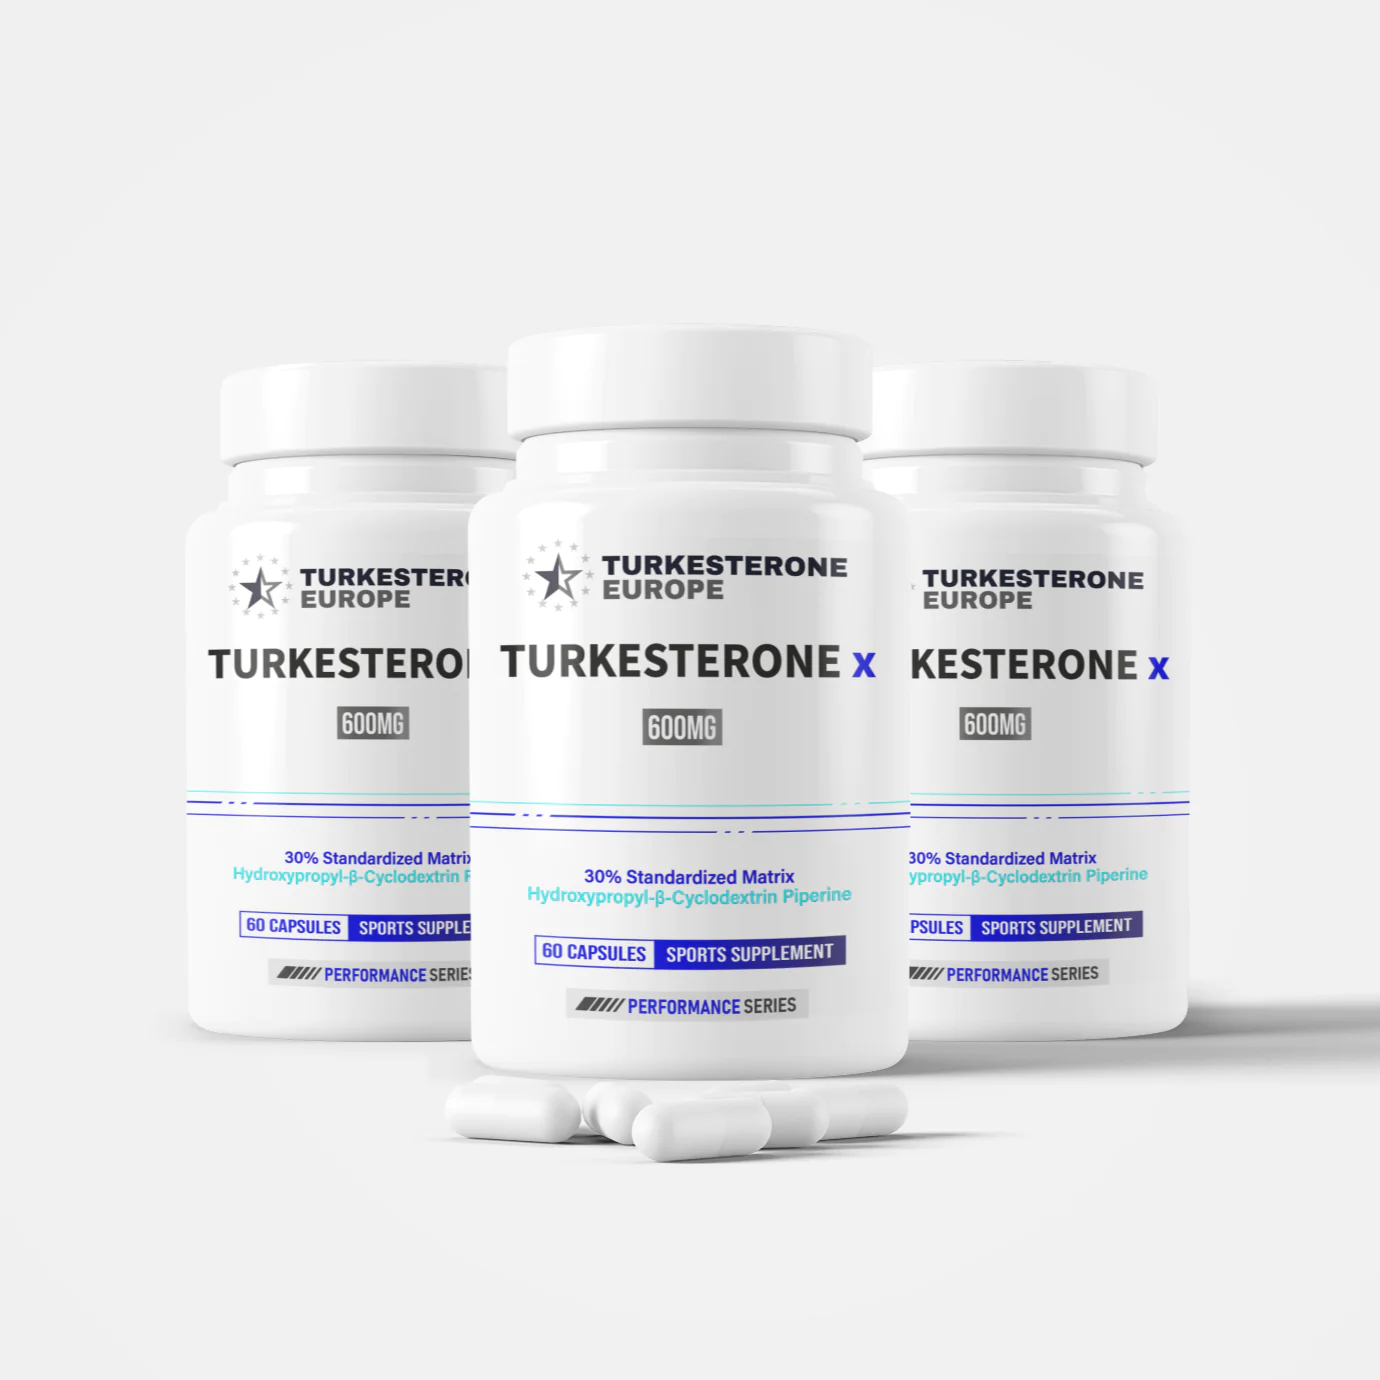 Gorilla Mind Turkesterone - A Natural Anabolic Steroid For Muscle Growth And Strength